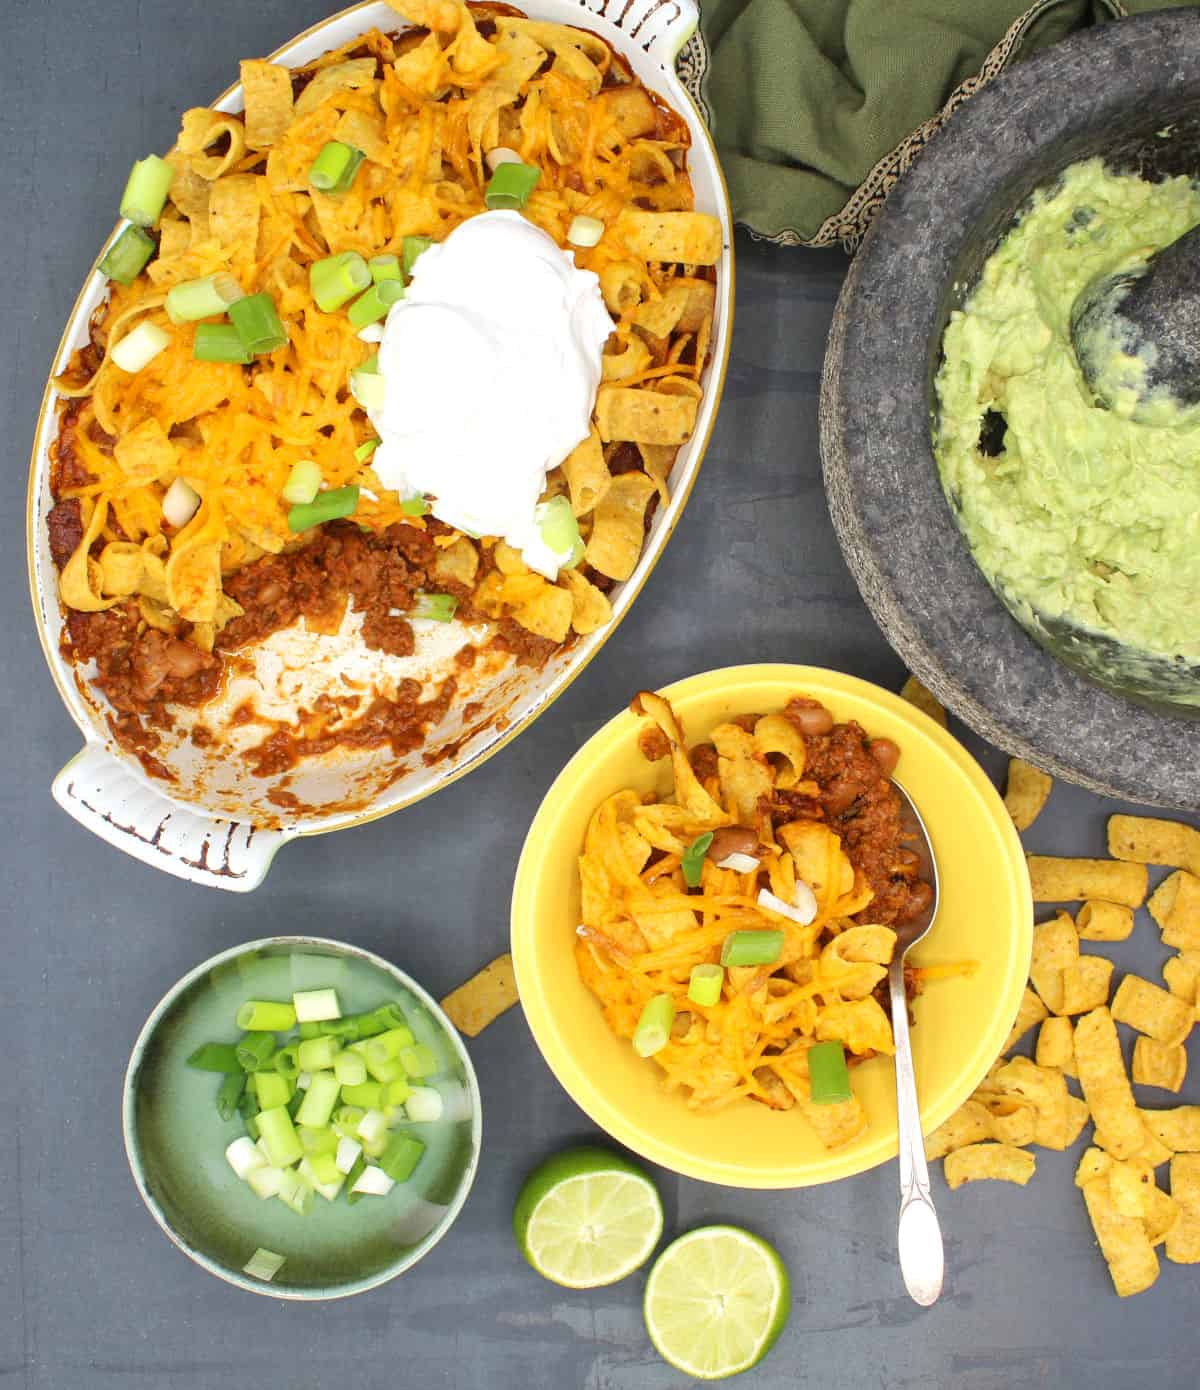 Vegan Frito pie in baking dish and bowl with vegan sour cream, scallions and guacamole.